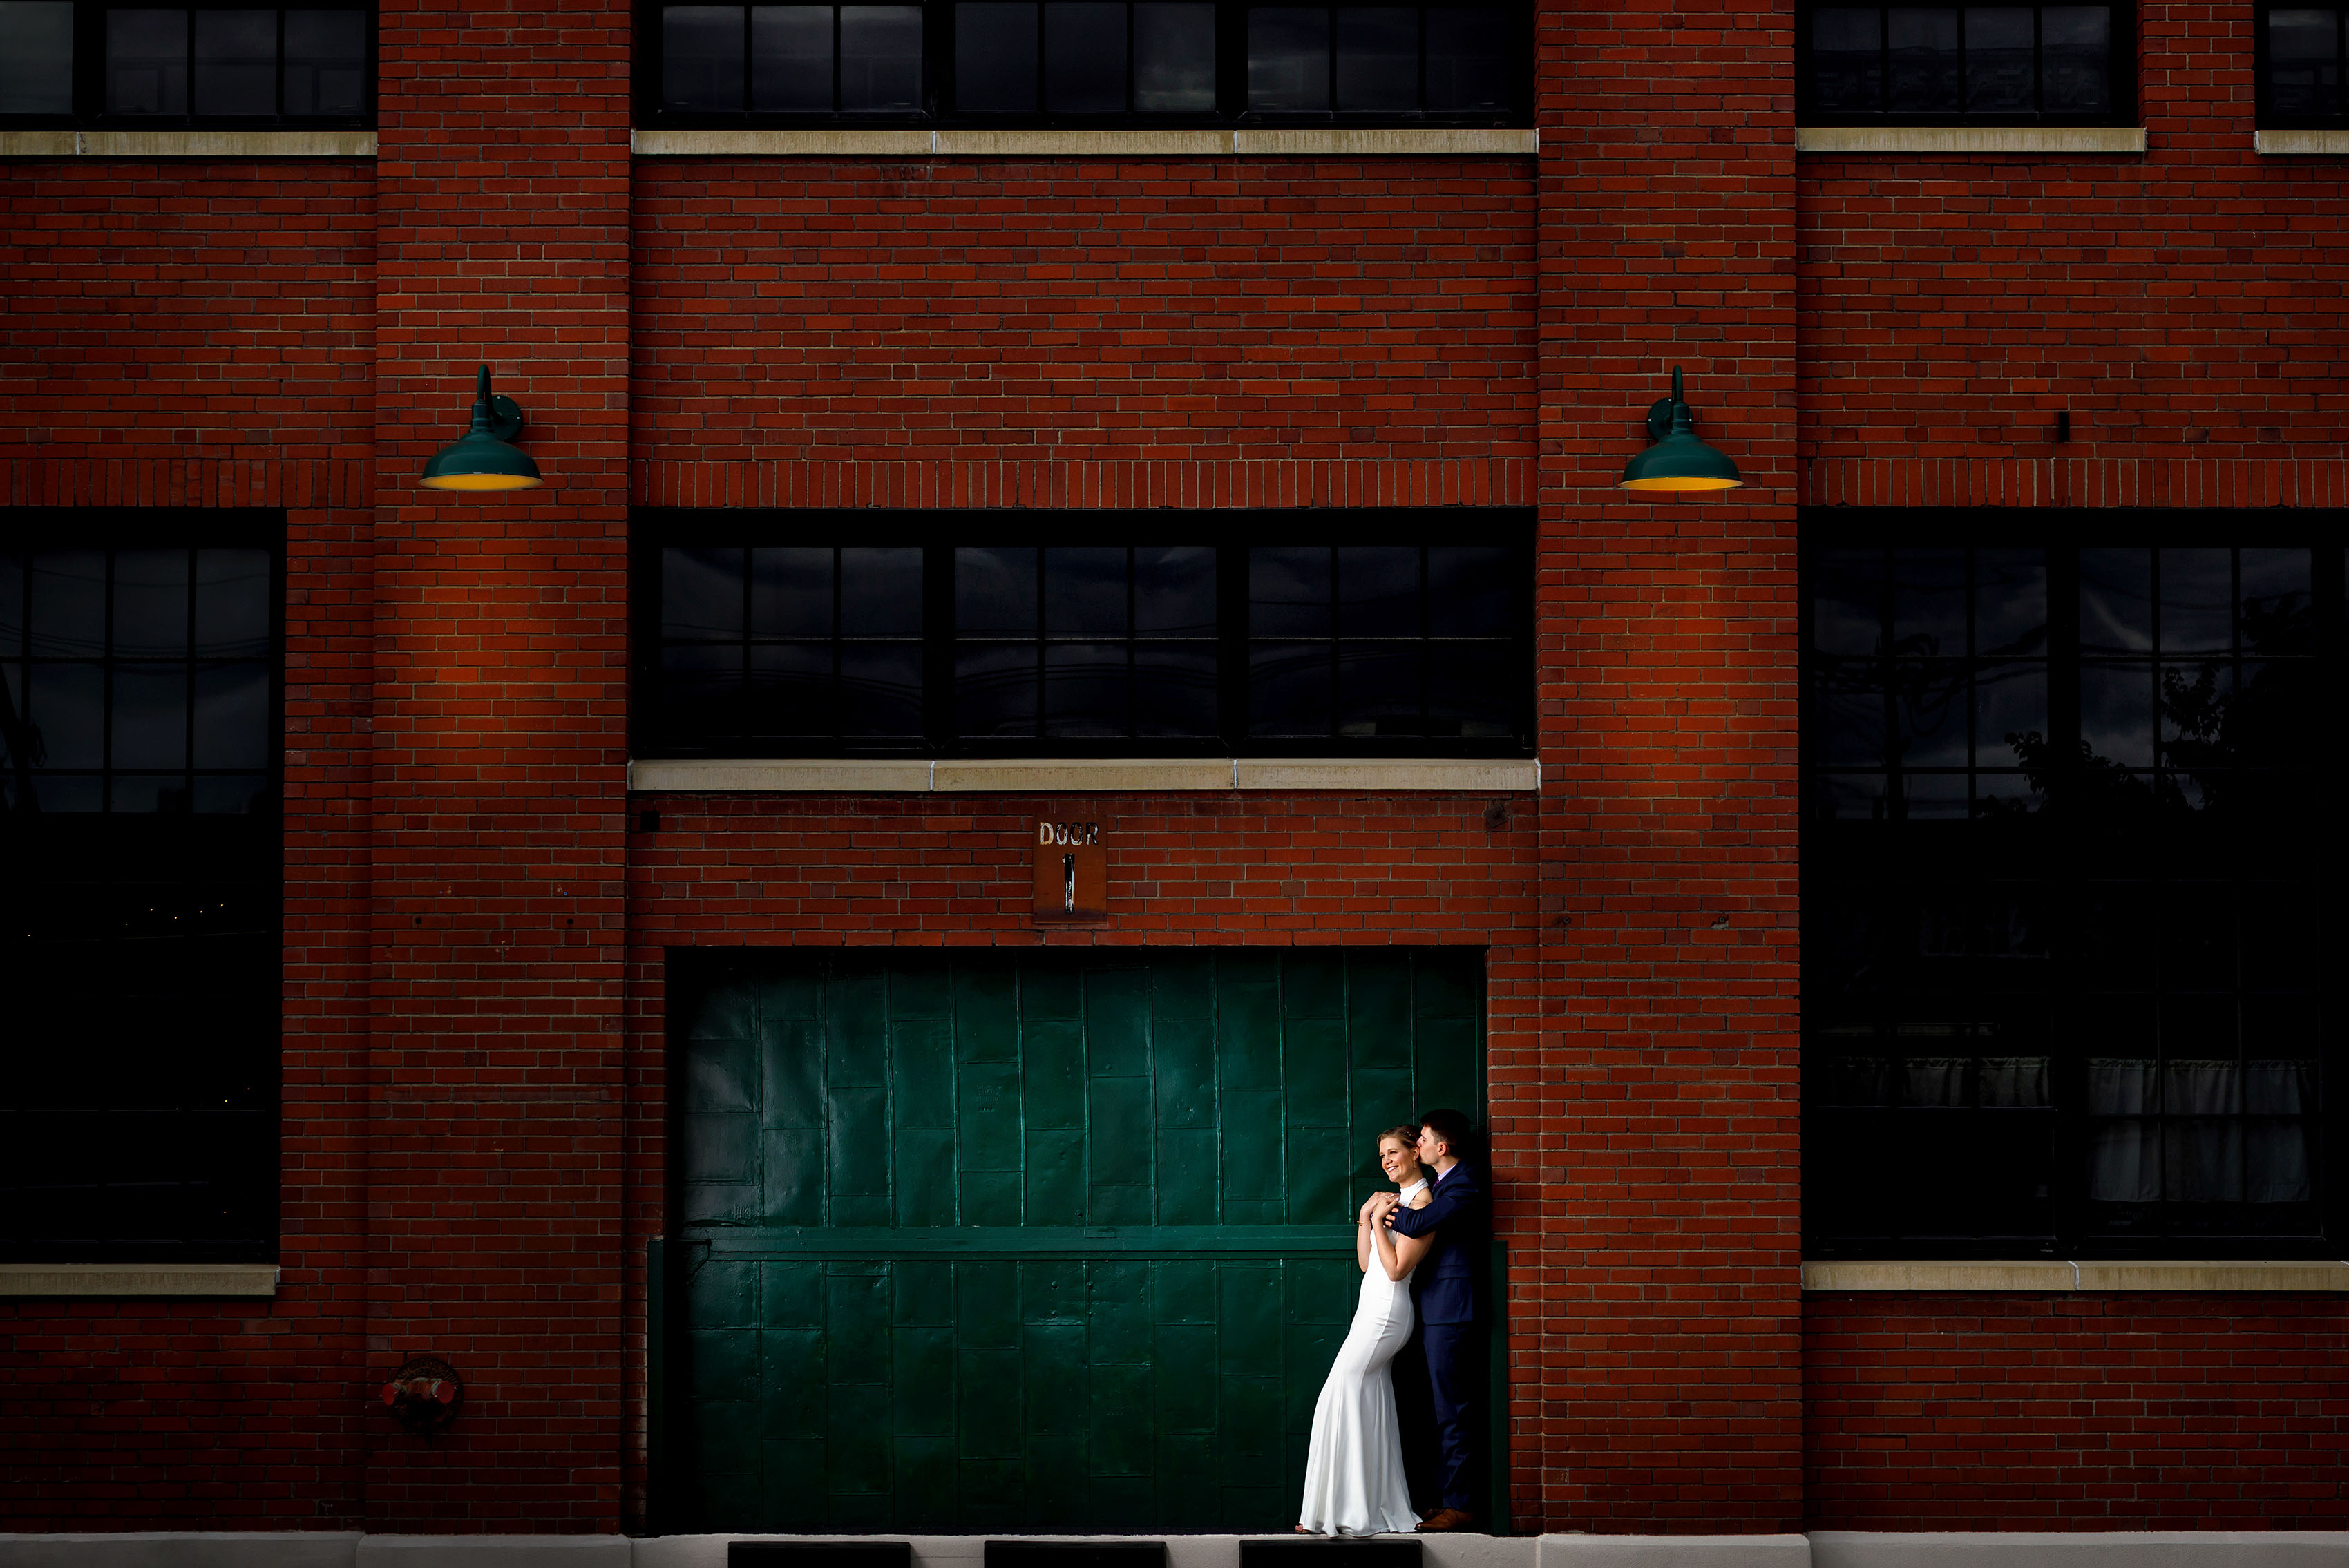 Couple pose for a wedding portrait in the RiNo neighborhood in Denver